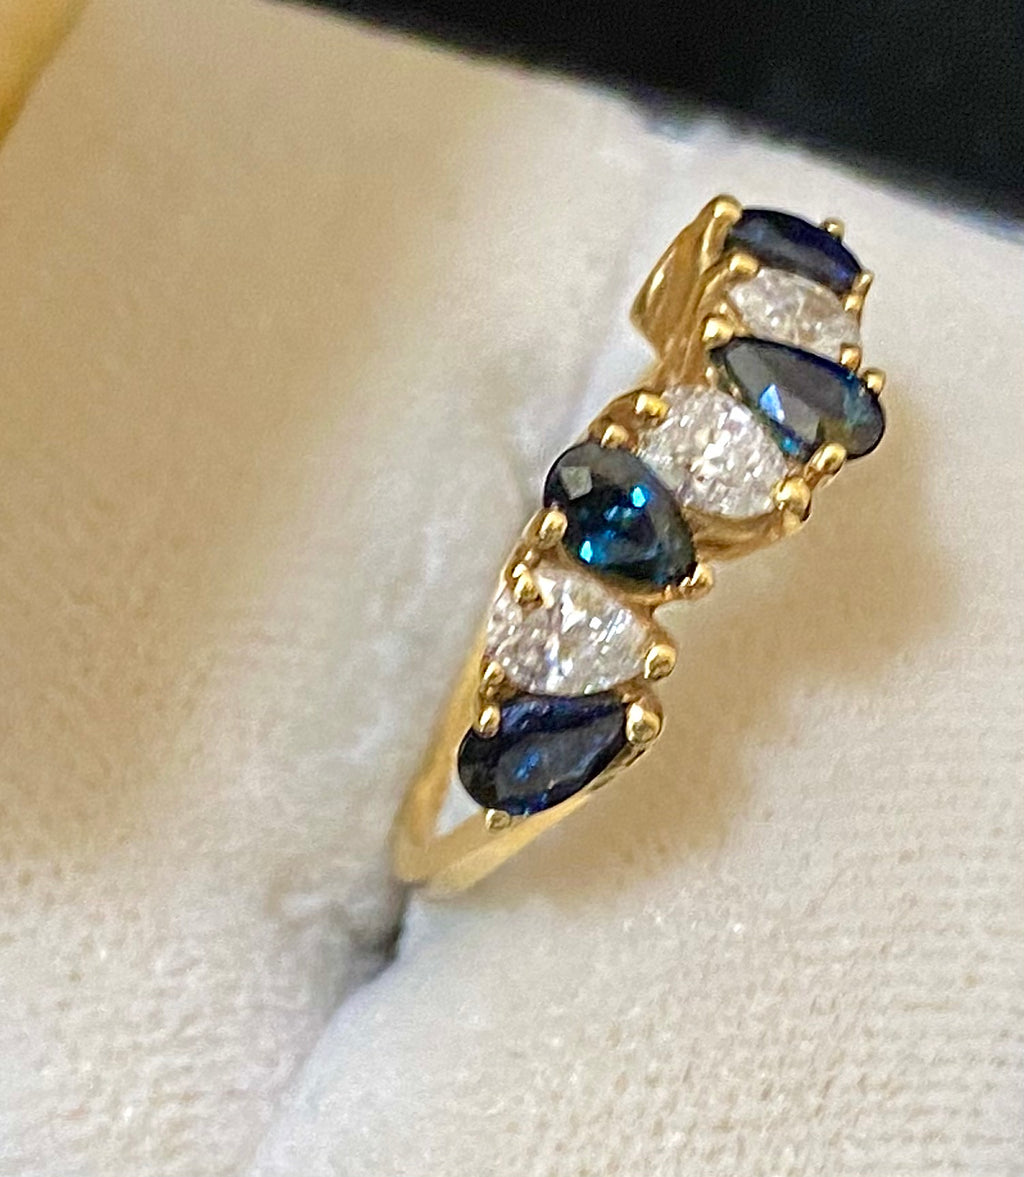 Unique Designer's Solid Yellow Gold with Diamond & Sapphire Ring $10K